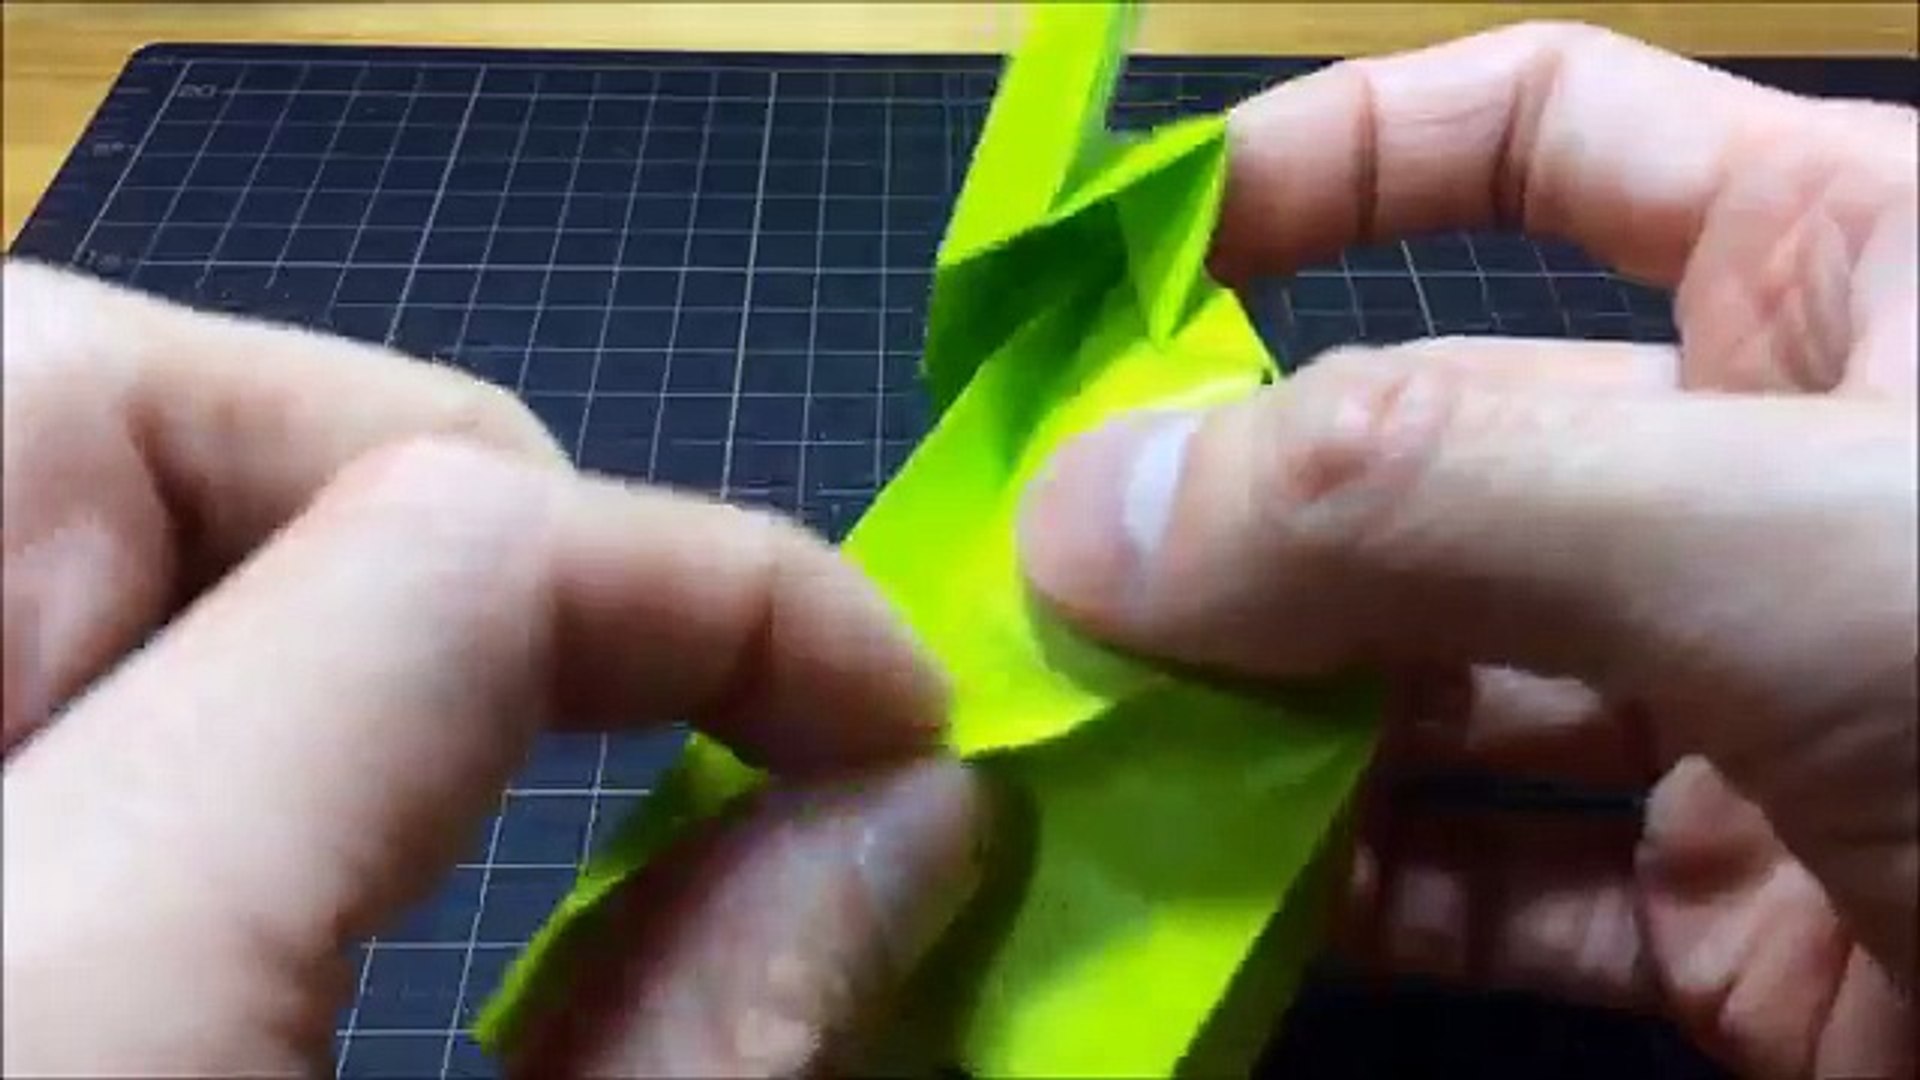 How To Make Minecraft Creeper Origami マインクラフト クリーパーの折り紙 Video Dailymotion